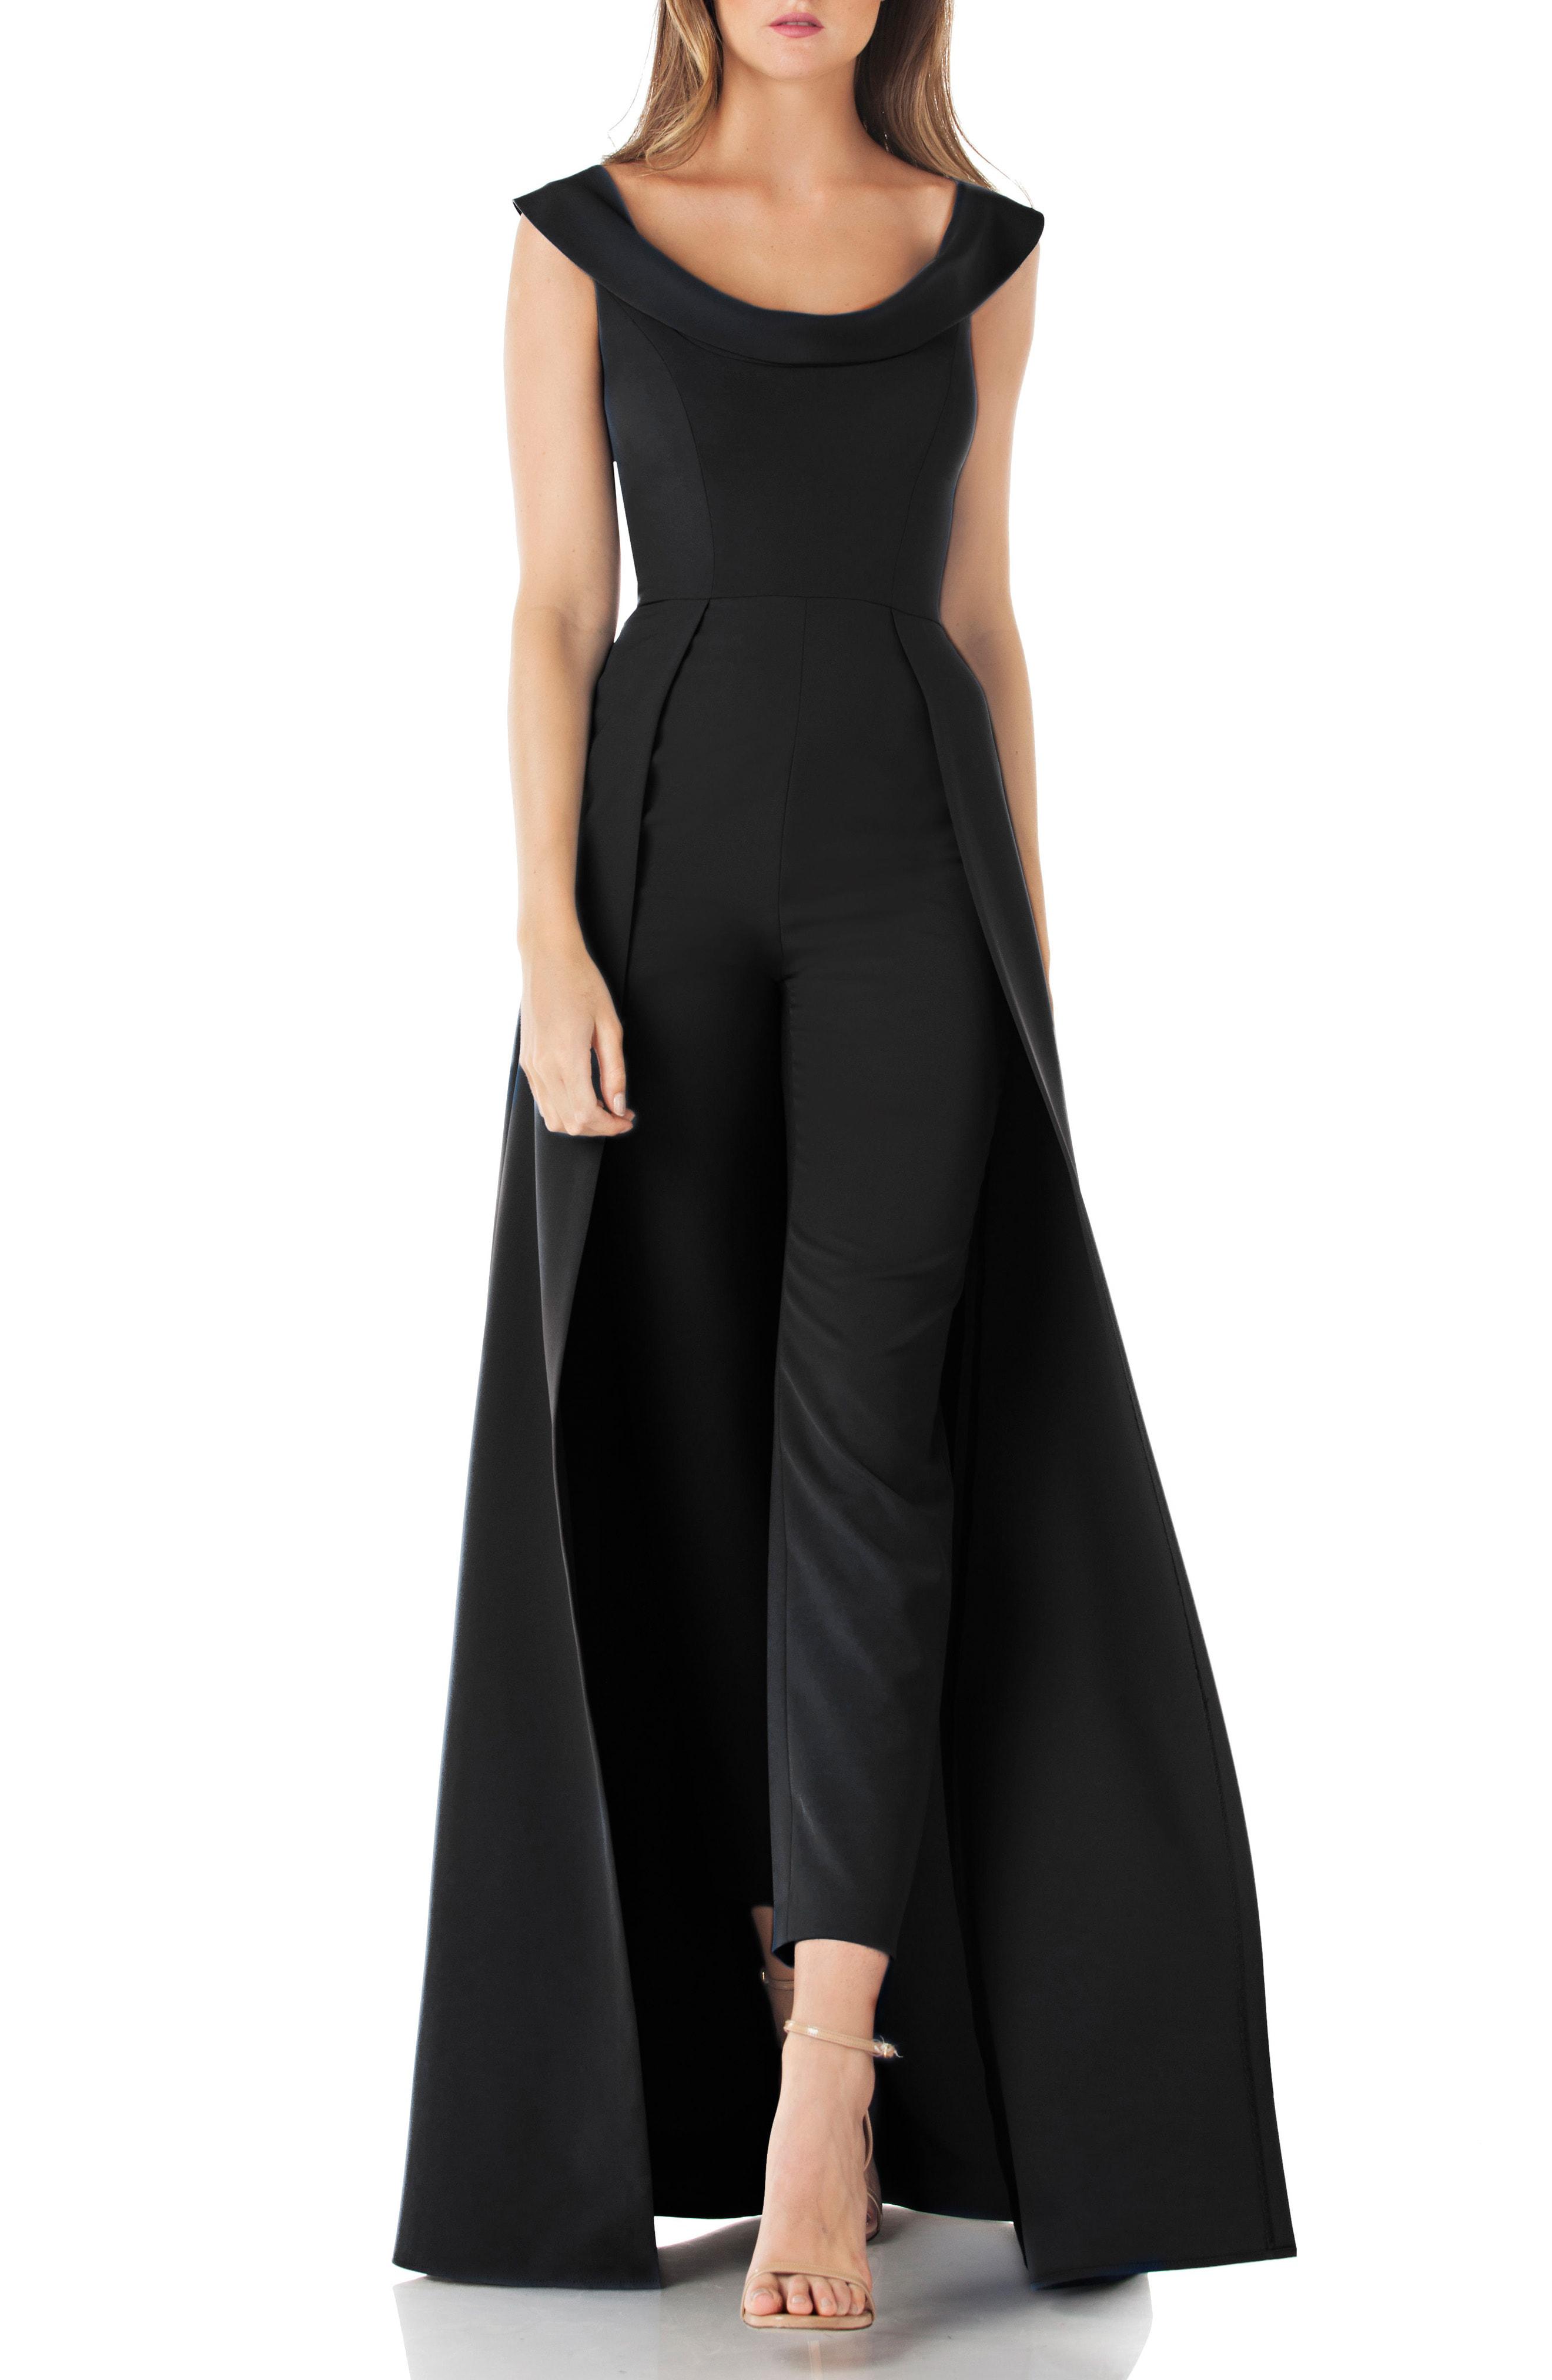 Lyst - Kay Unger Jumpsuit Gown in Black